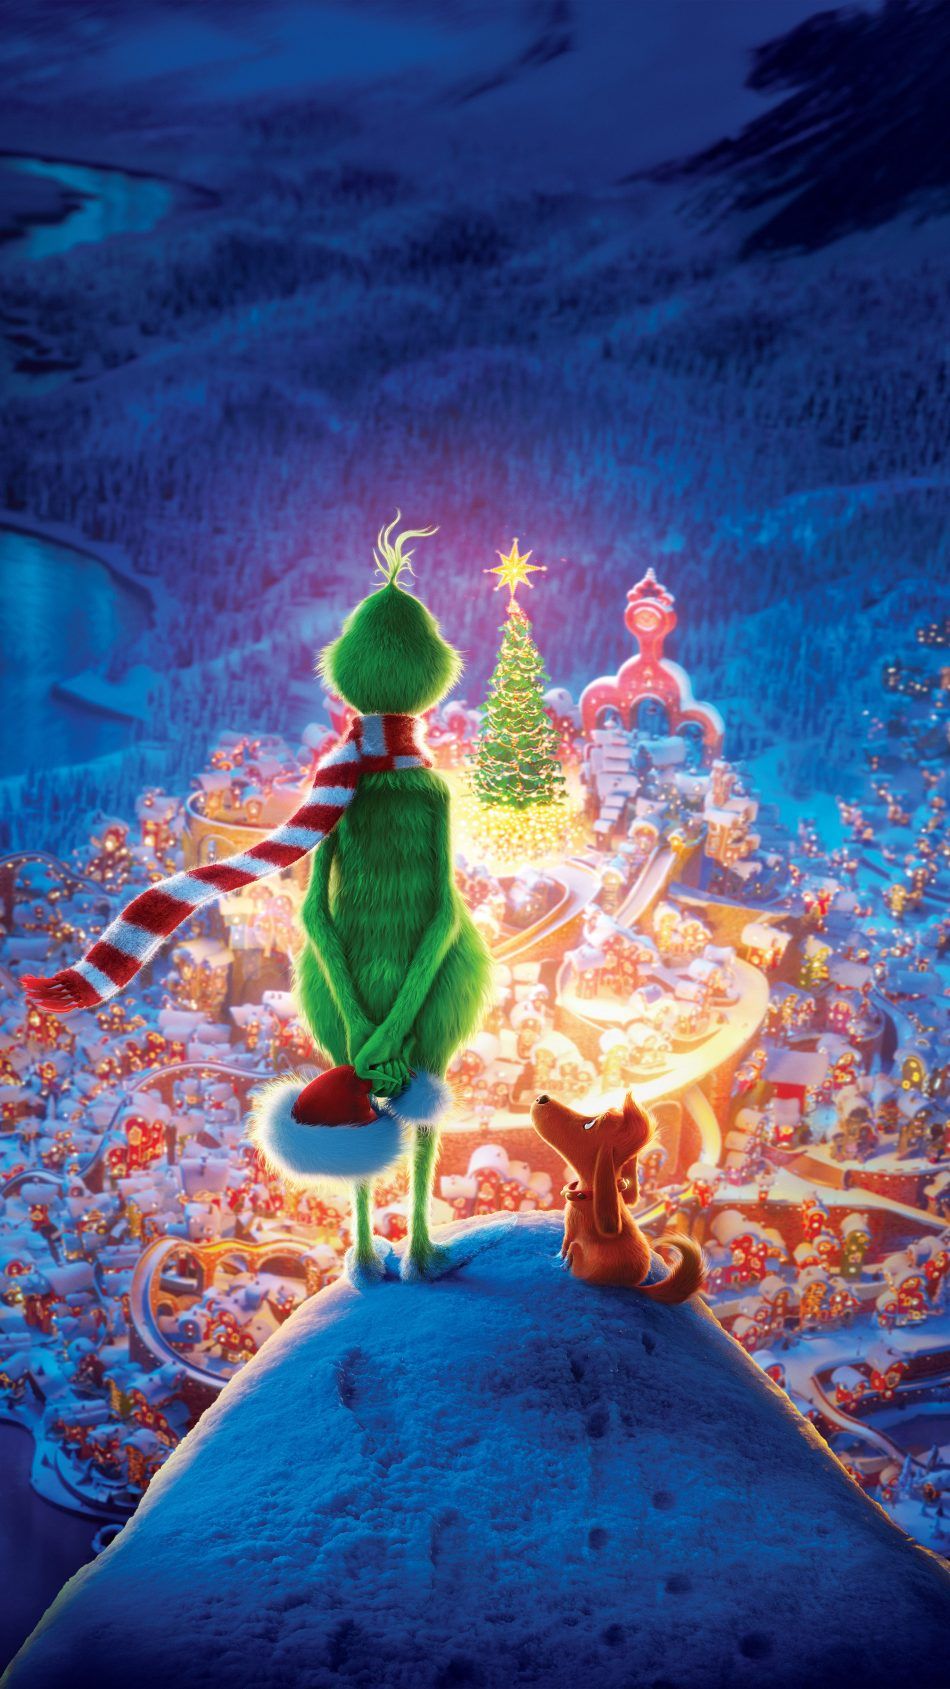 The Grinch Animation Pure 4k Ultra HD Mobile